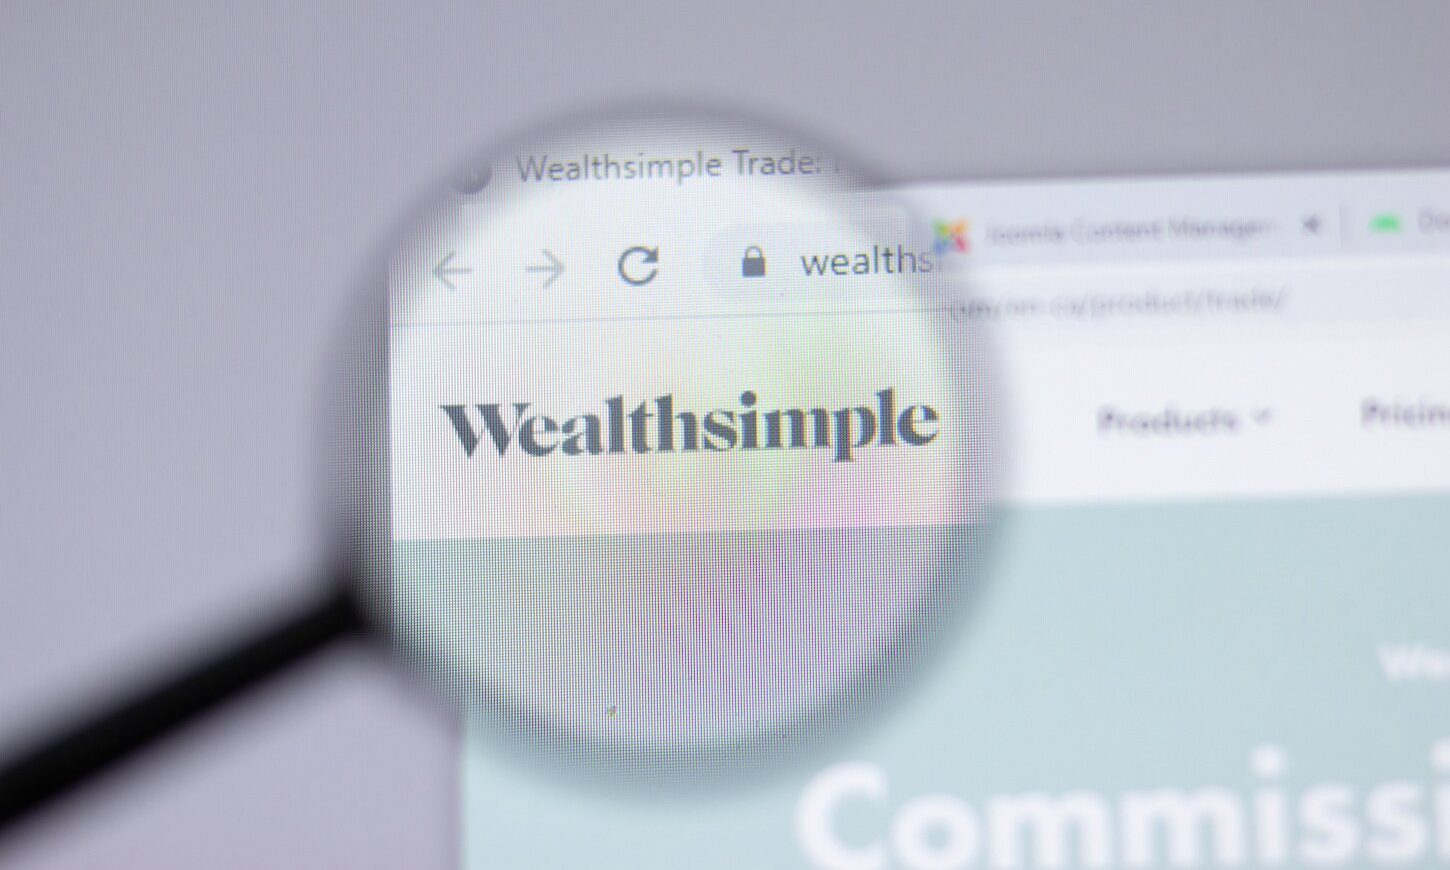 Zooming in on Wealthsimple